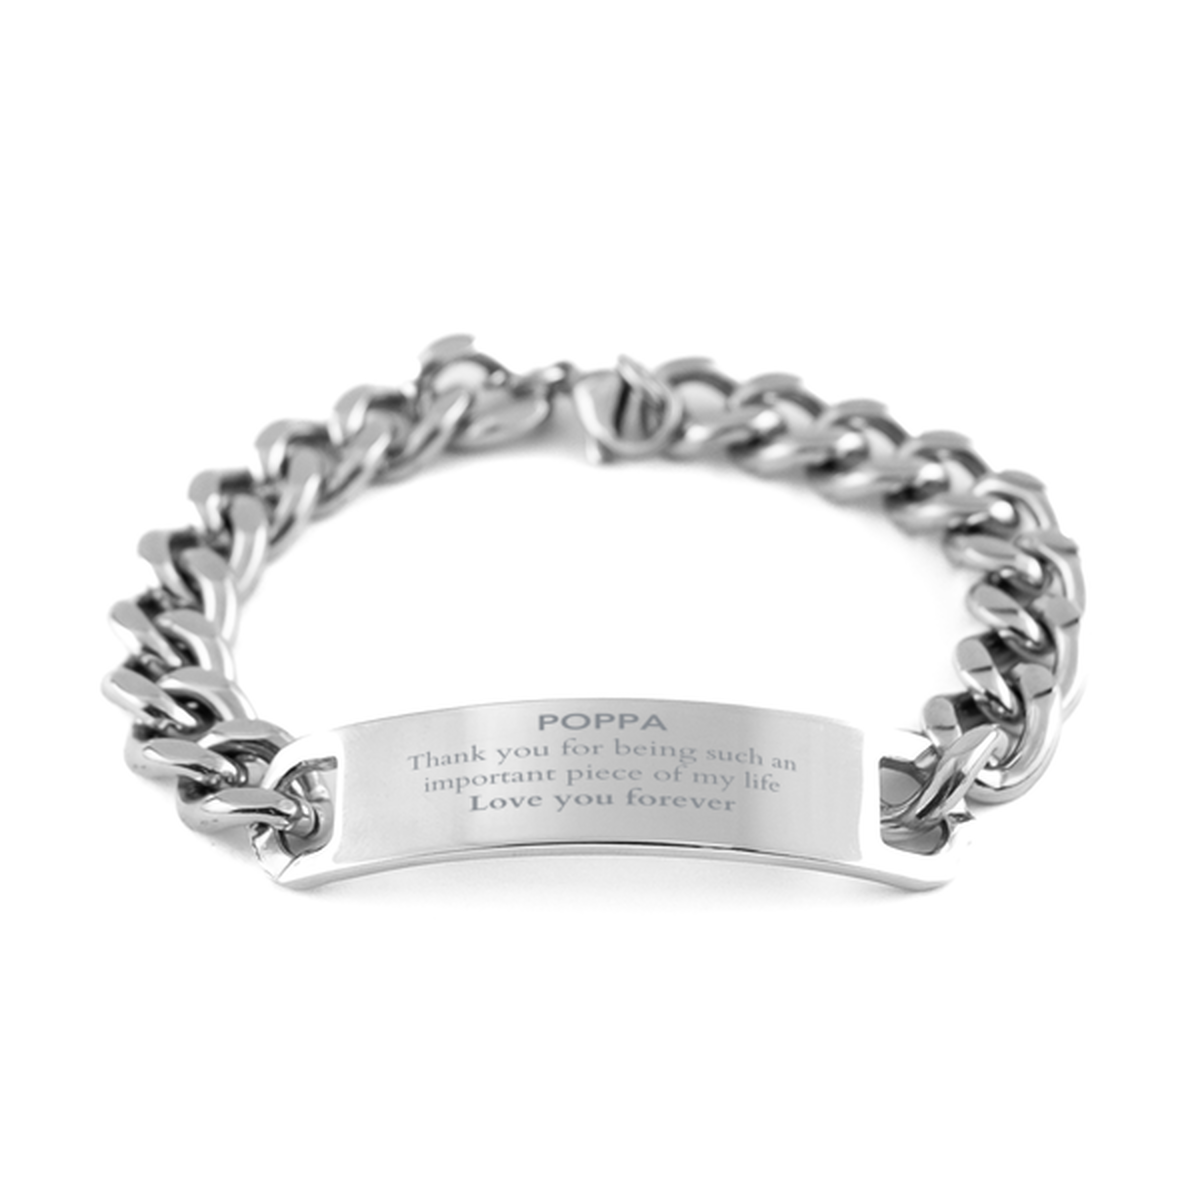 Appropriate Poppa Cuban Chain Stainless Steel Bracelet Epic Birthday Gifts for Poppa Thank you for being such an important piece of my life Poppa Christmas Mothers Fathers Day